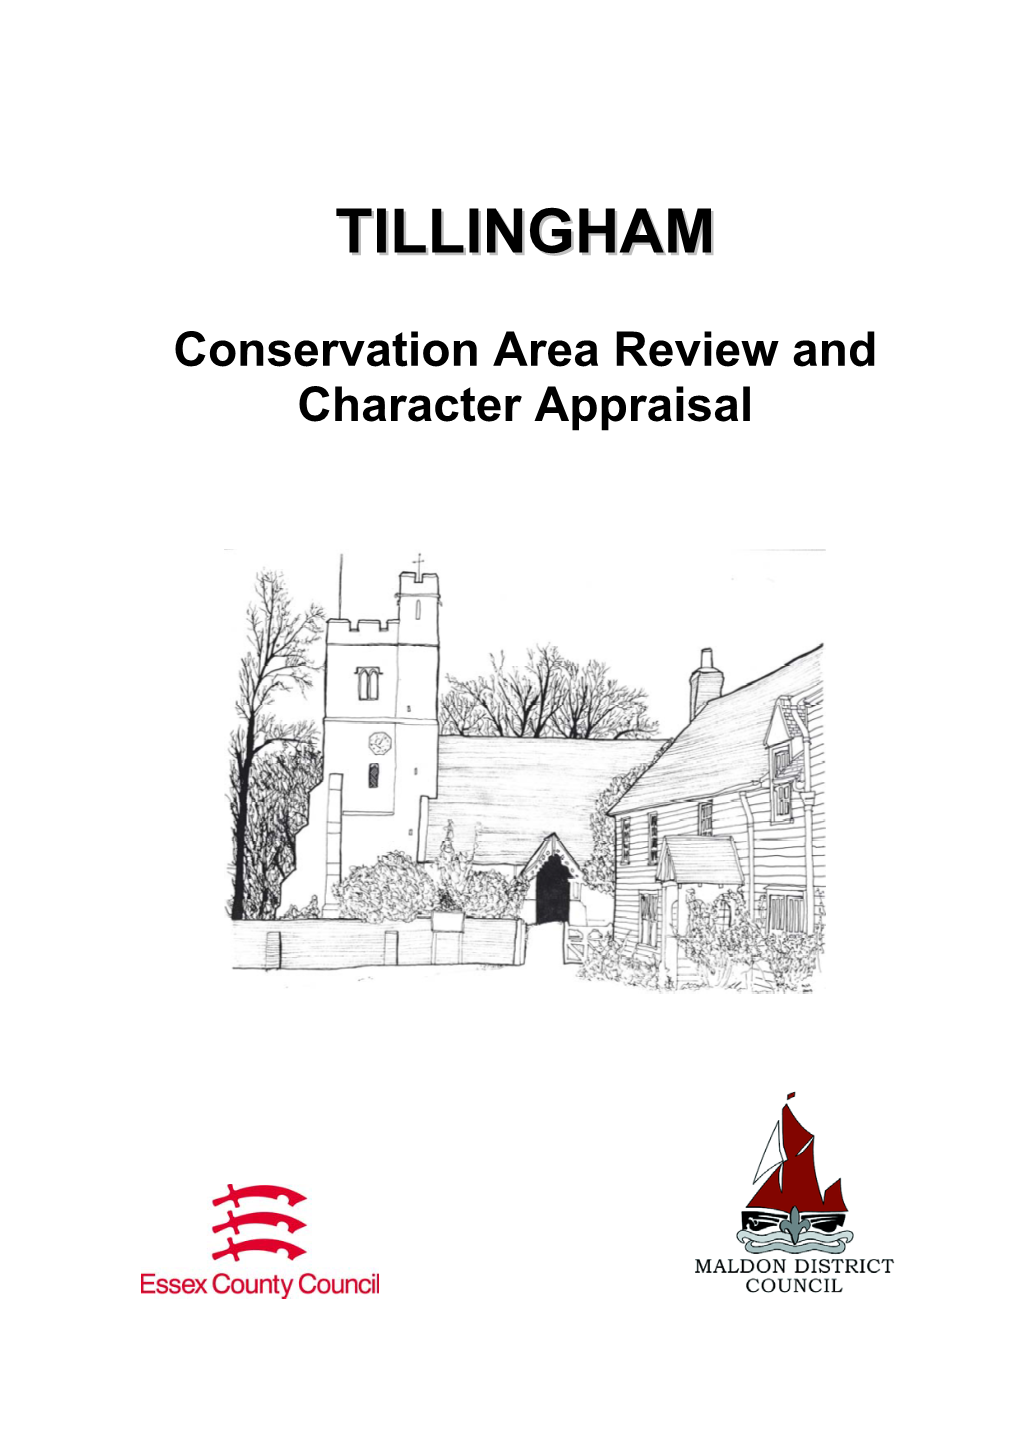 Tillingham Conservation Area Review and Character Appraisal